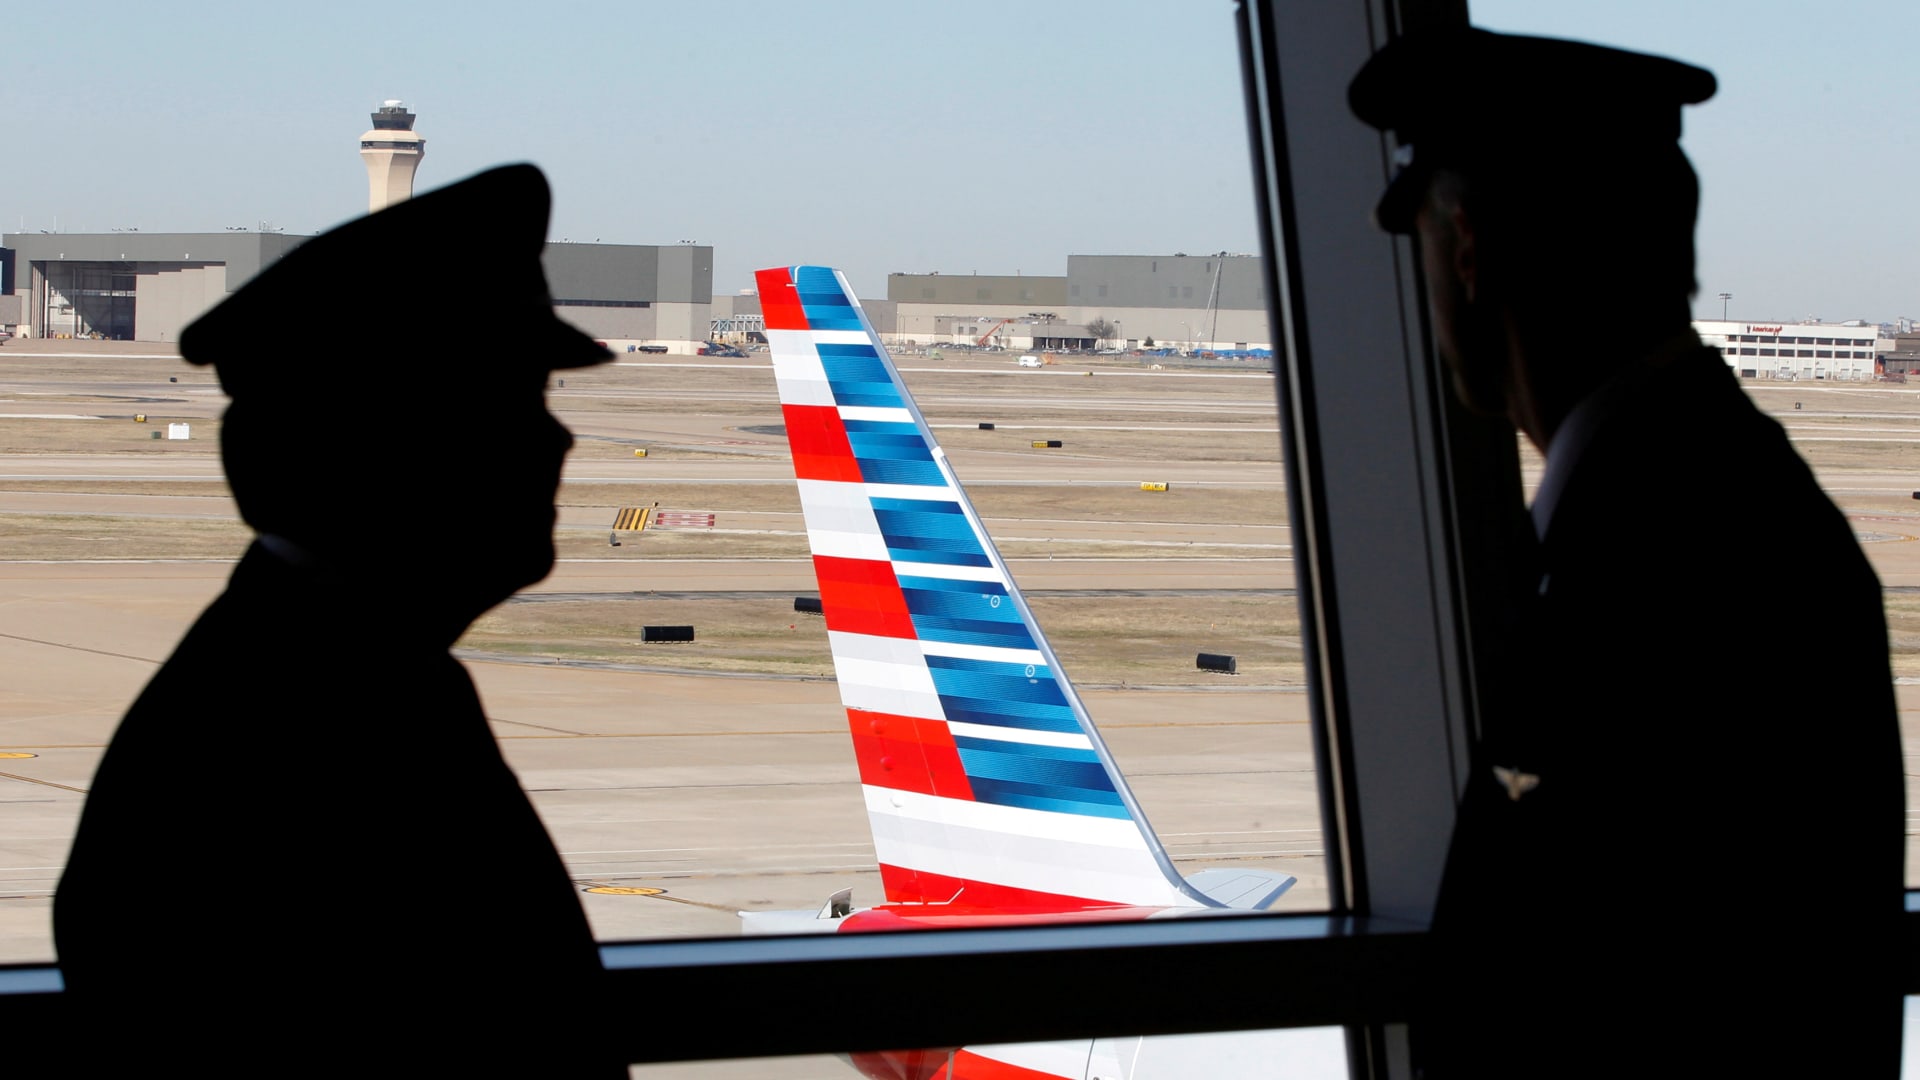 Pilots talk as they look at the tail of an American Airlines aircraft at Dallas-Ft Worth International Airport.